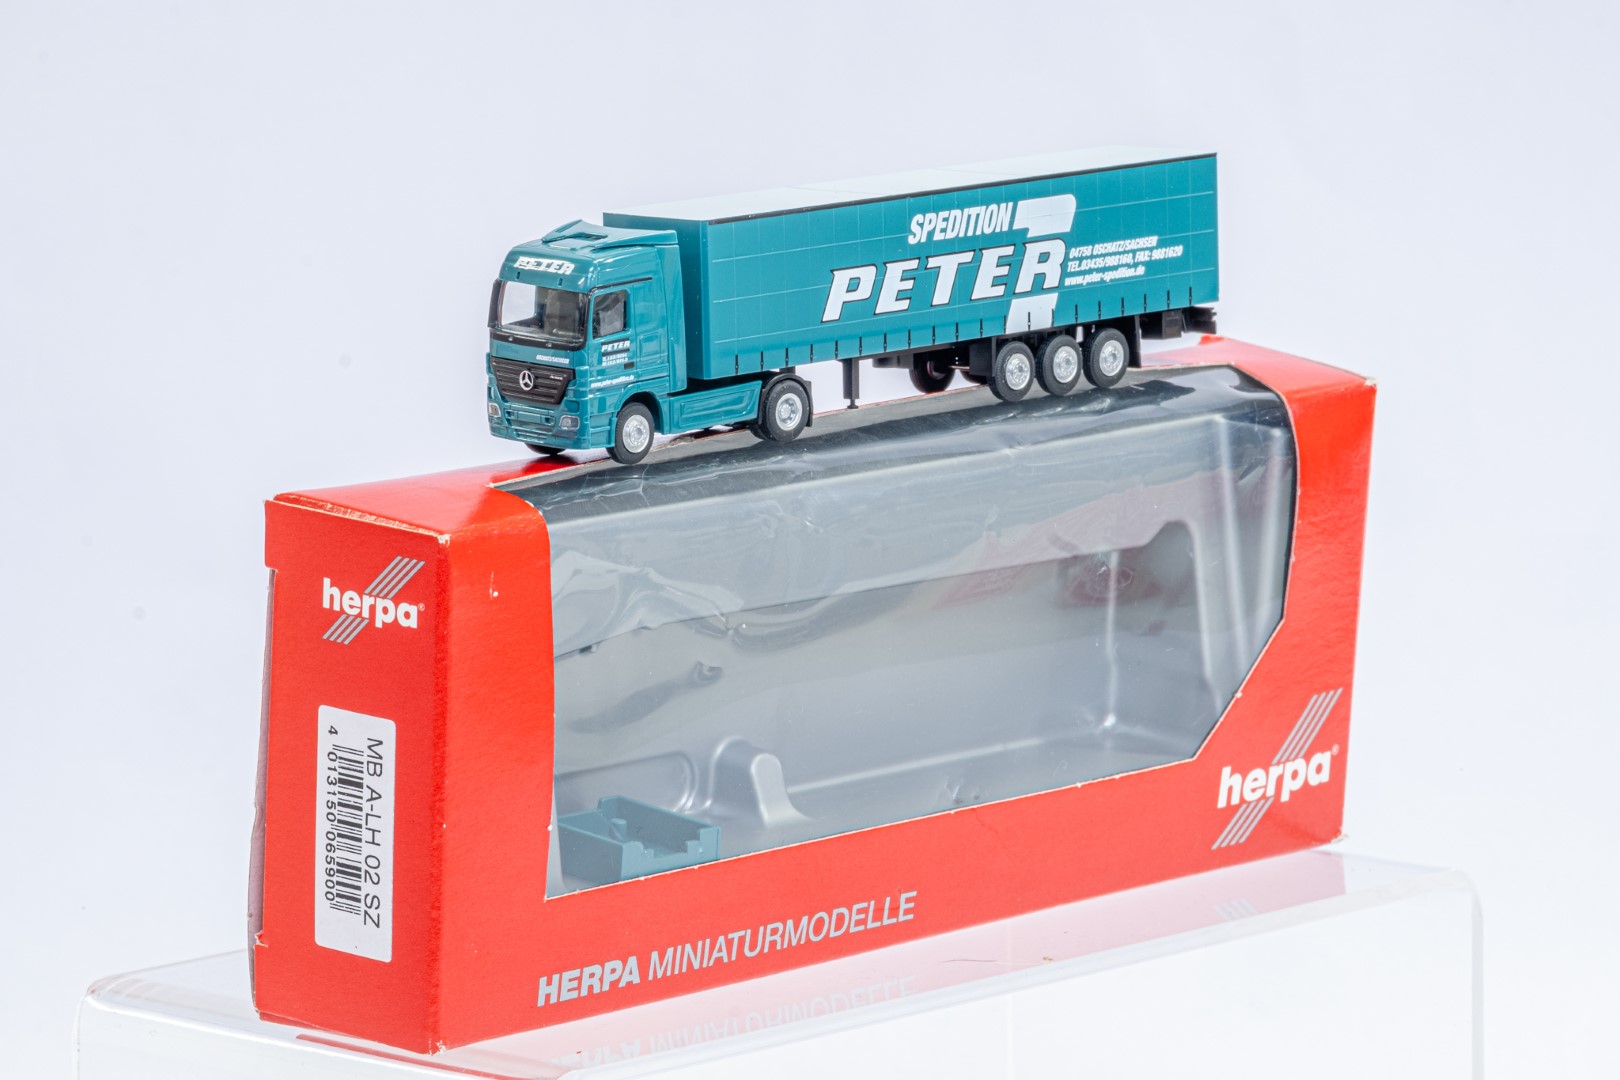 Herpa Merc Actros Box Trailer - Peter Spedition - Image 3 of 4